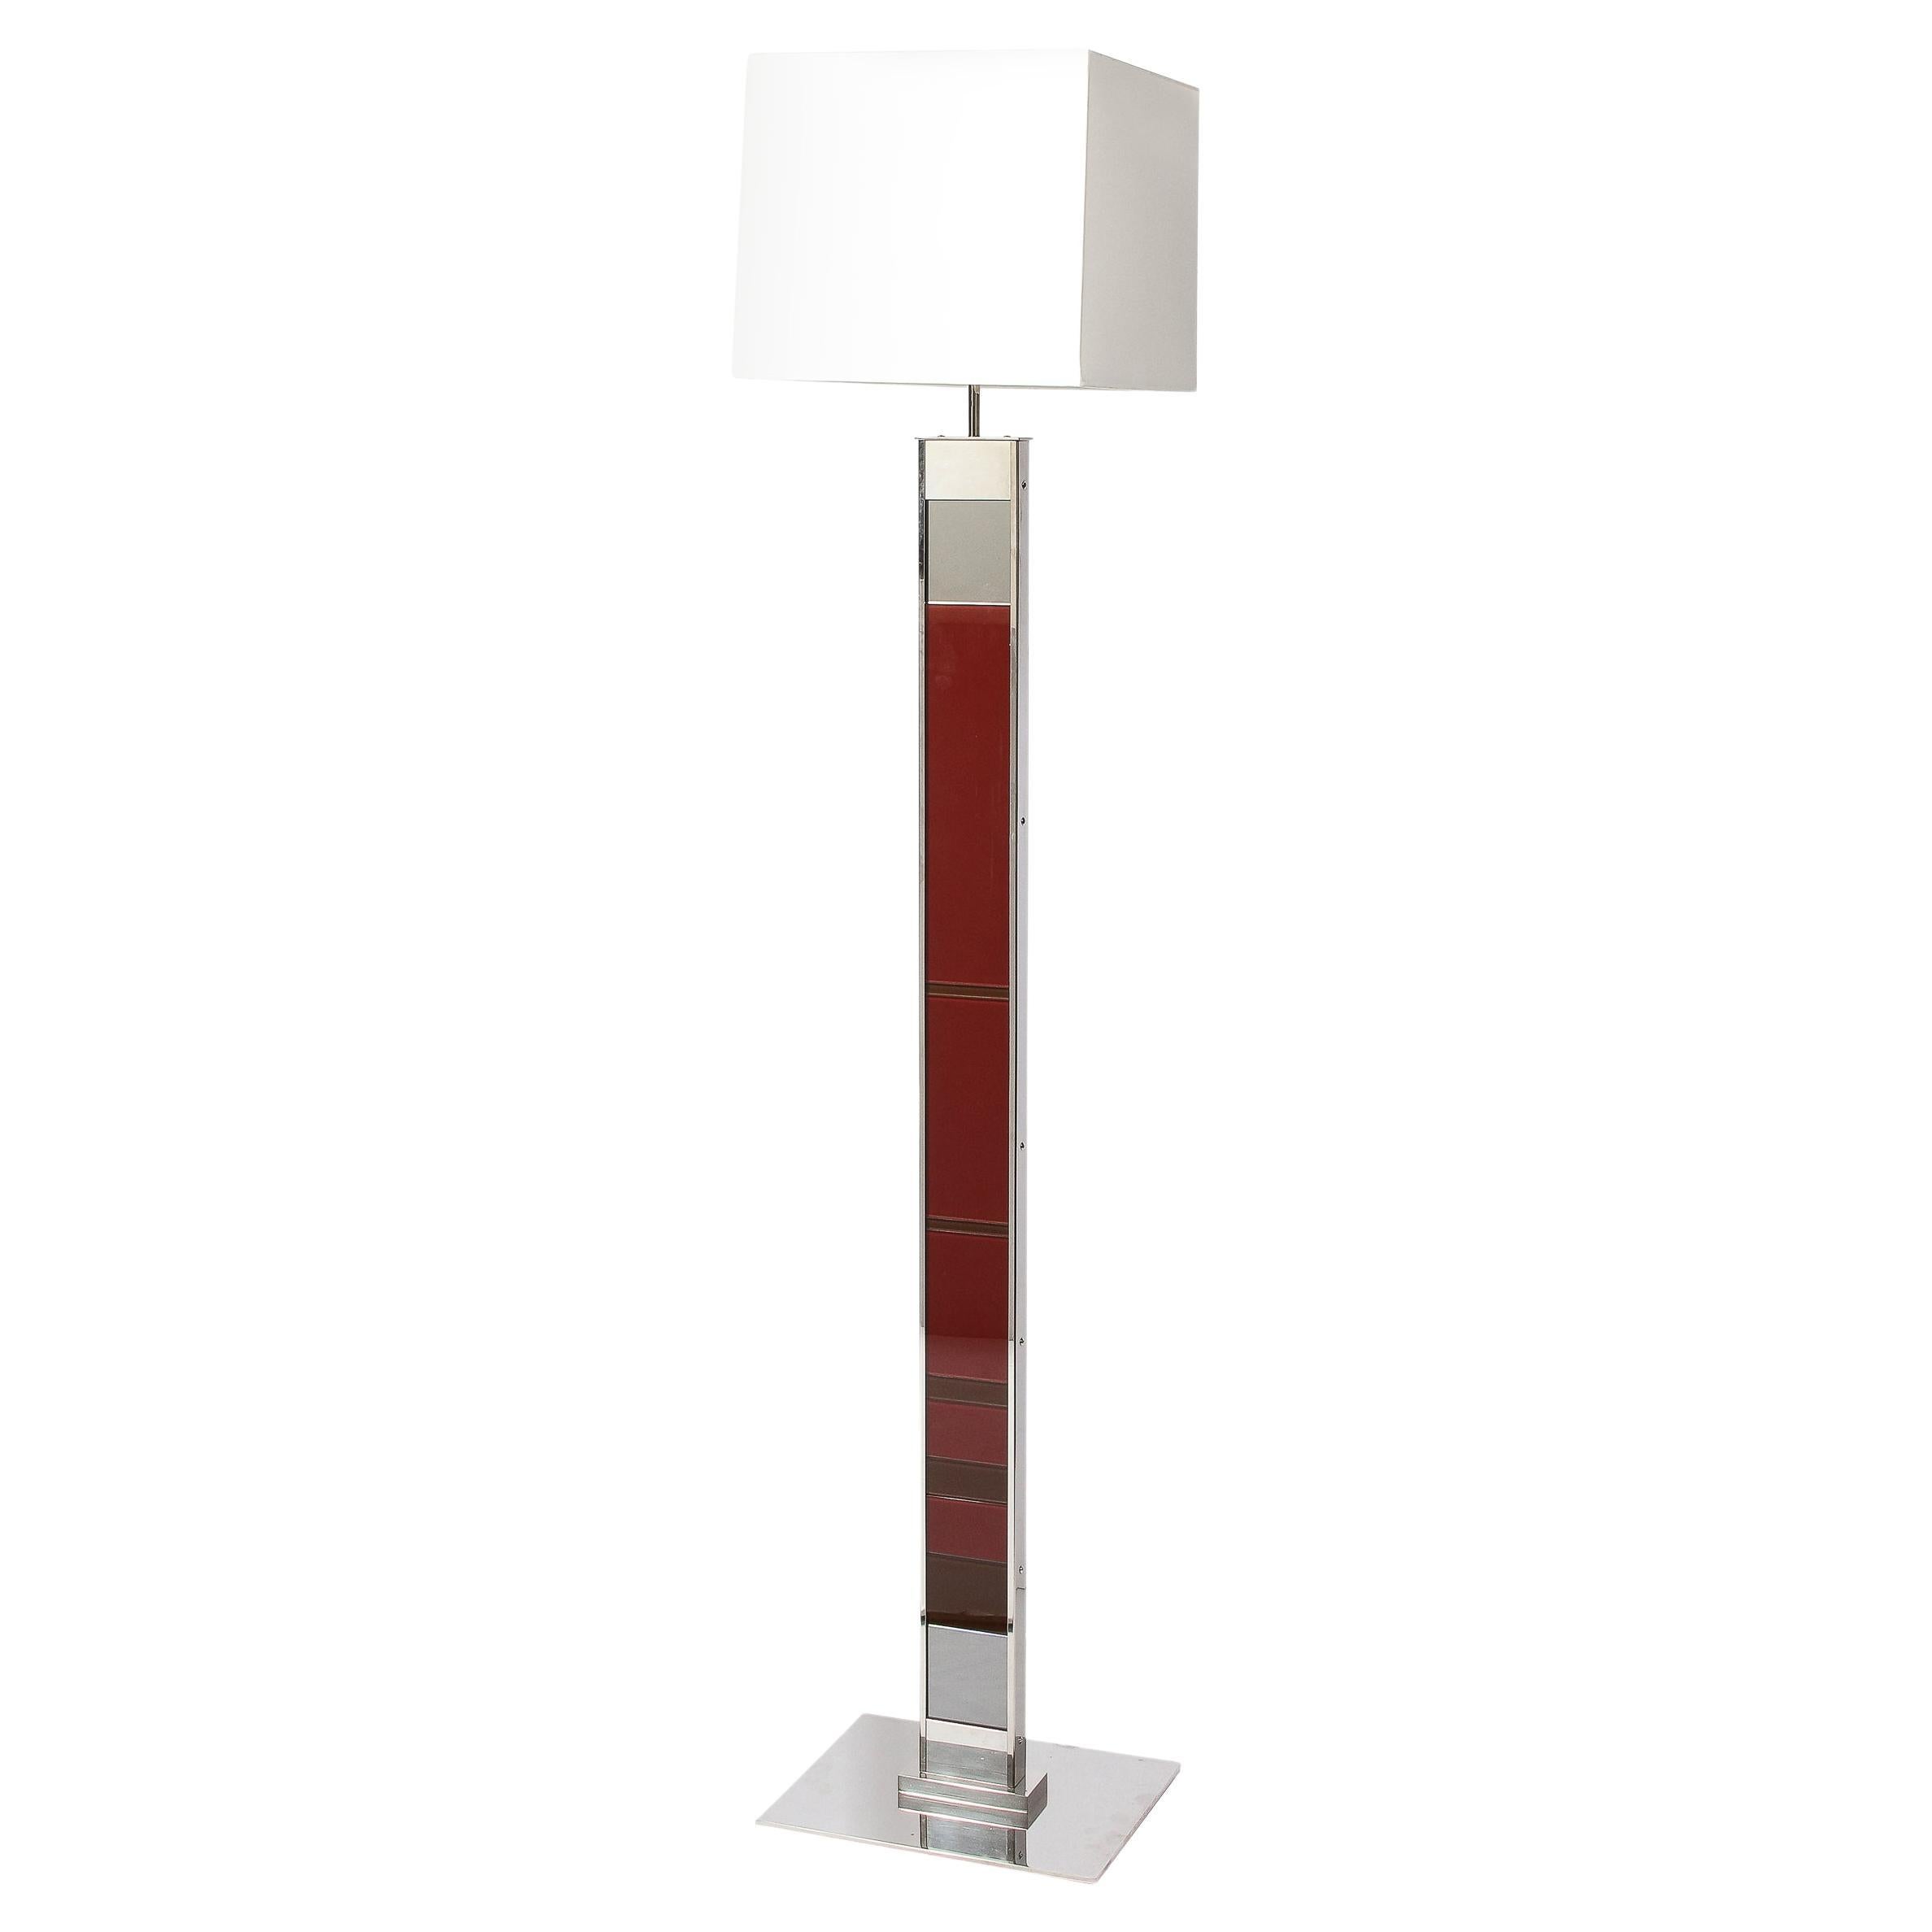 Modernist Nickel Floor Lamp with Stacked Oxblood, Umber, and Smoked Glass Body